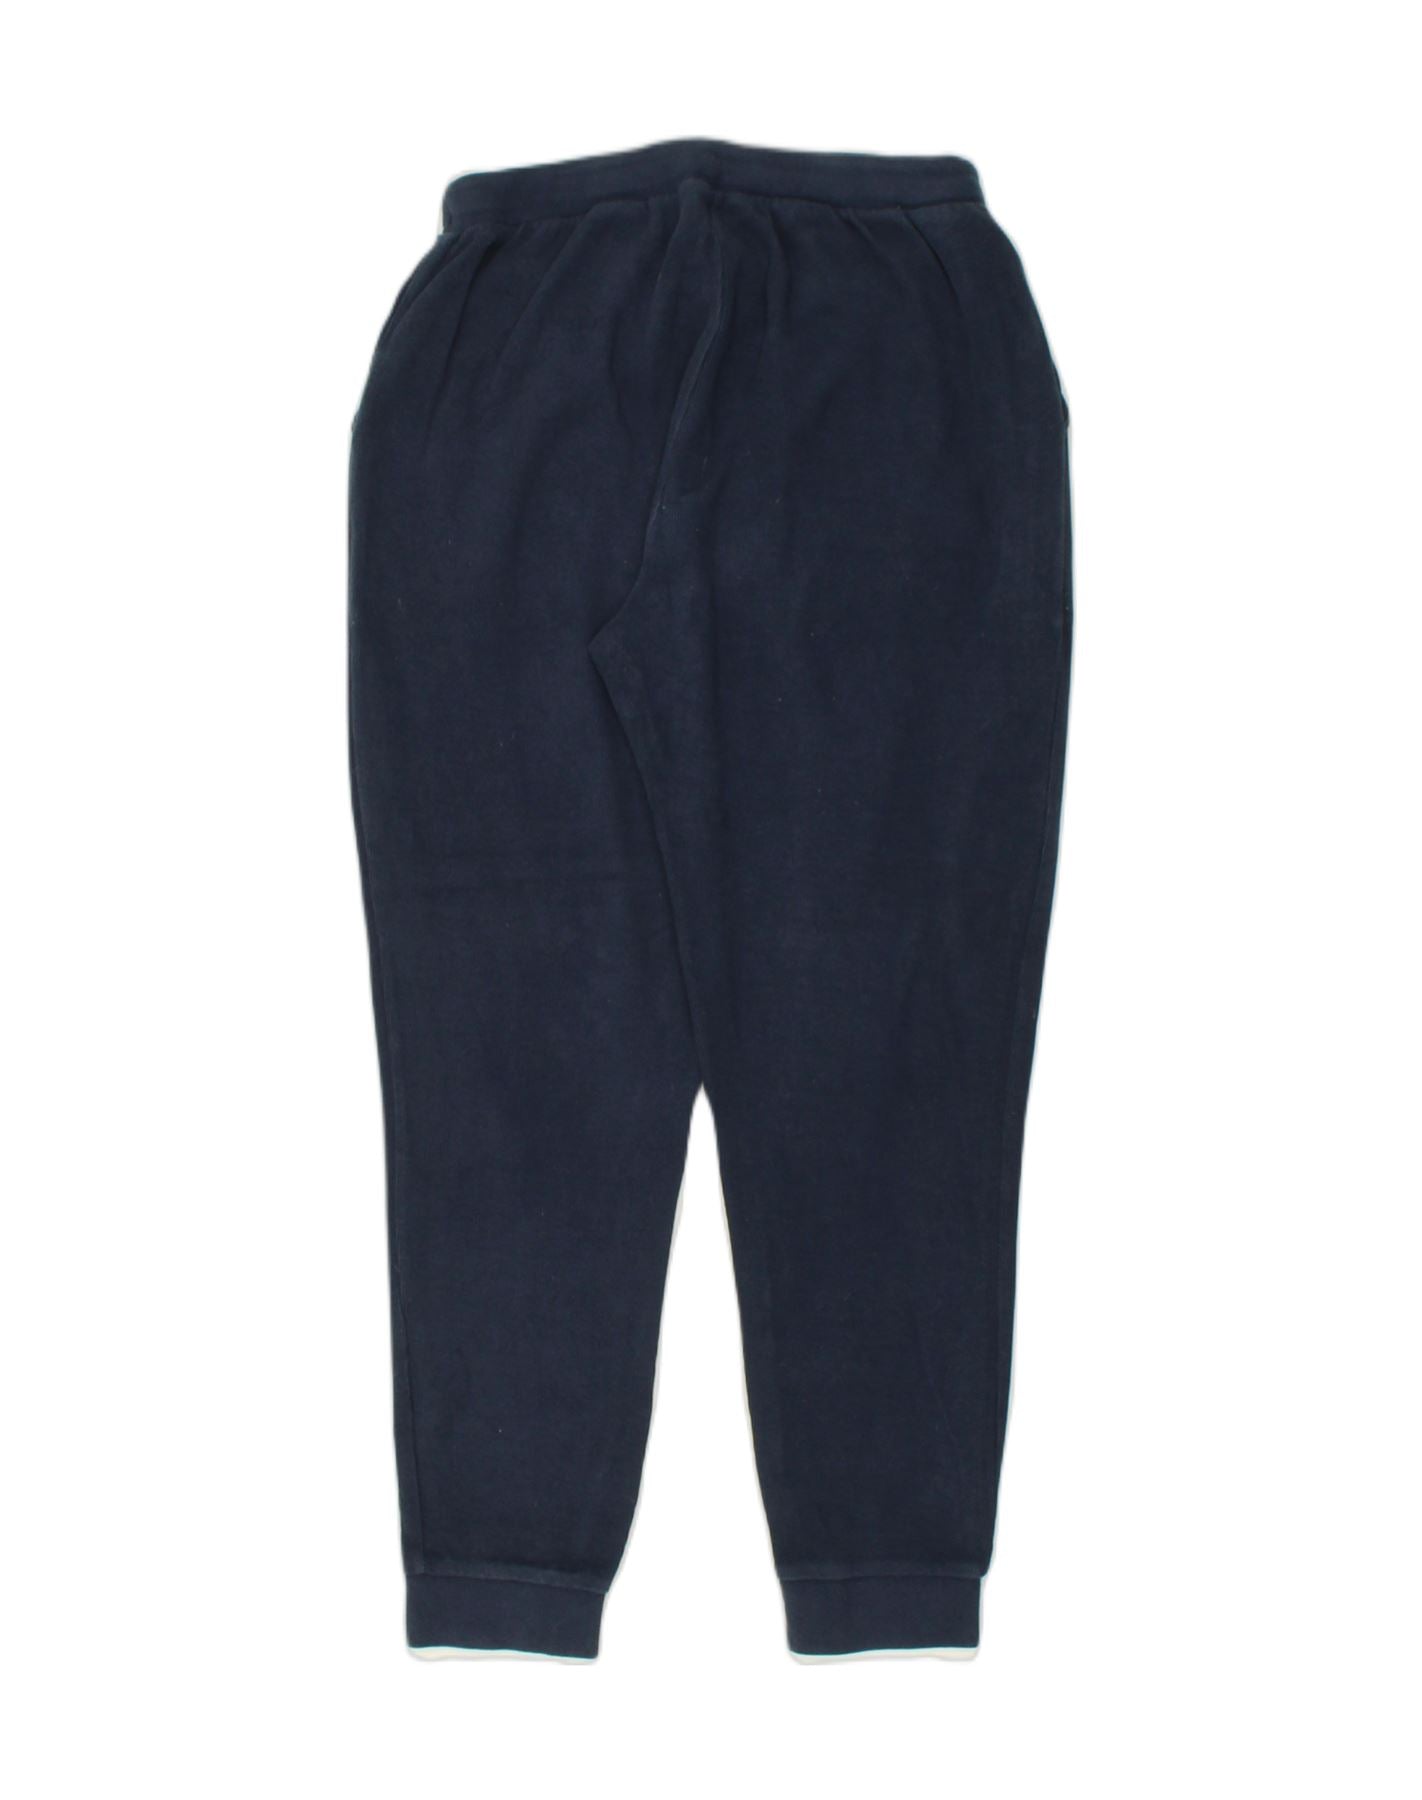 CREW CLOTHING Womens Tracksuit Trousers Joggers UK 18 XL Navy Blue Cotton, Vintage & Second-Hand Clothing Online